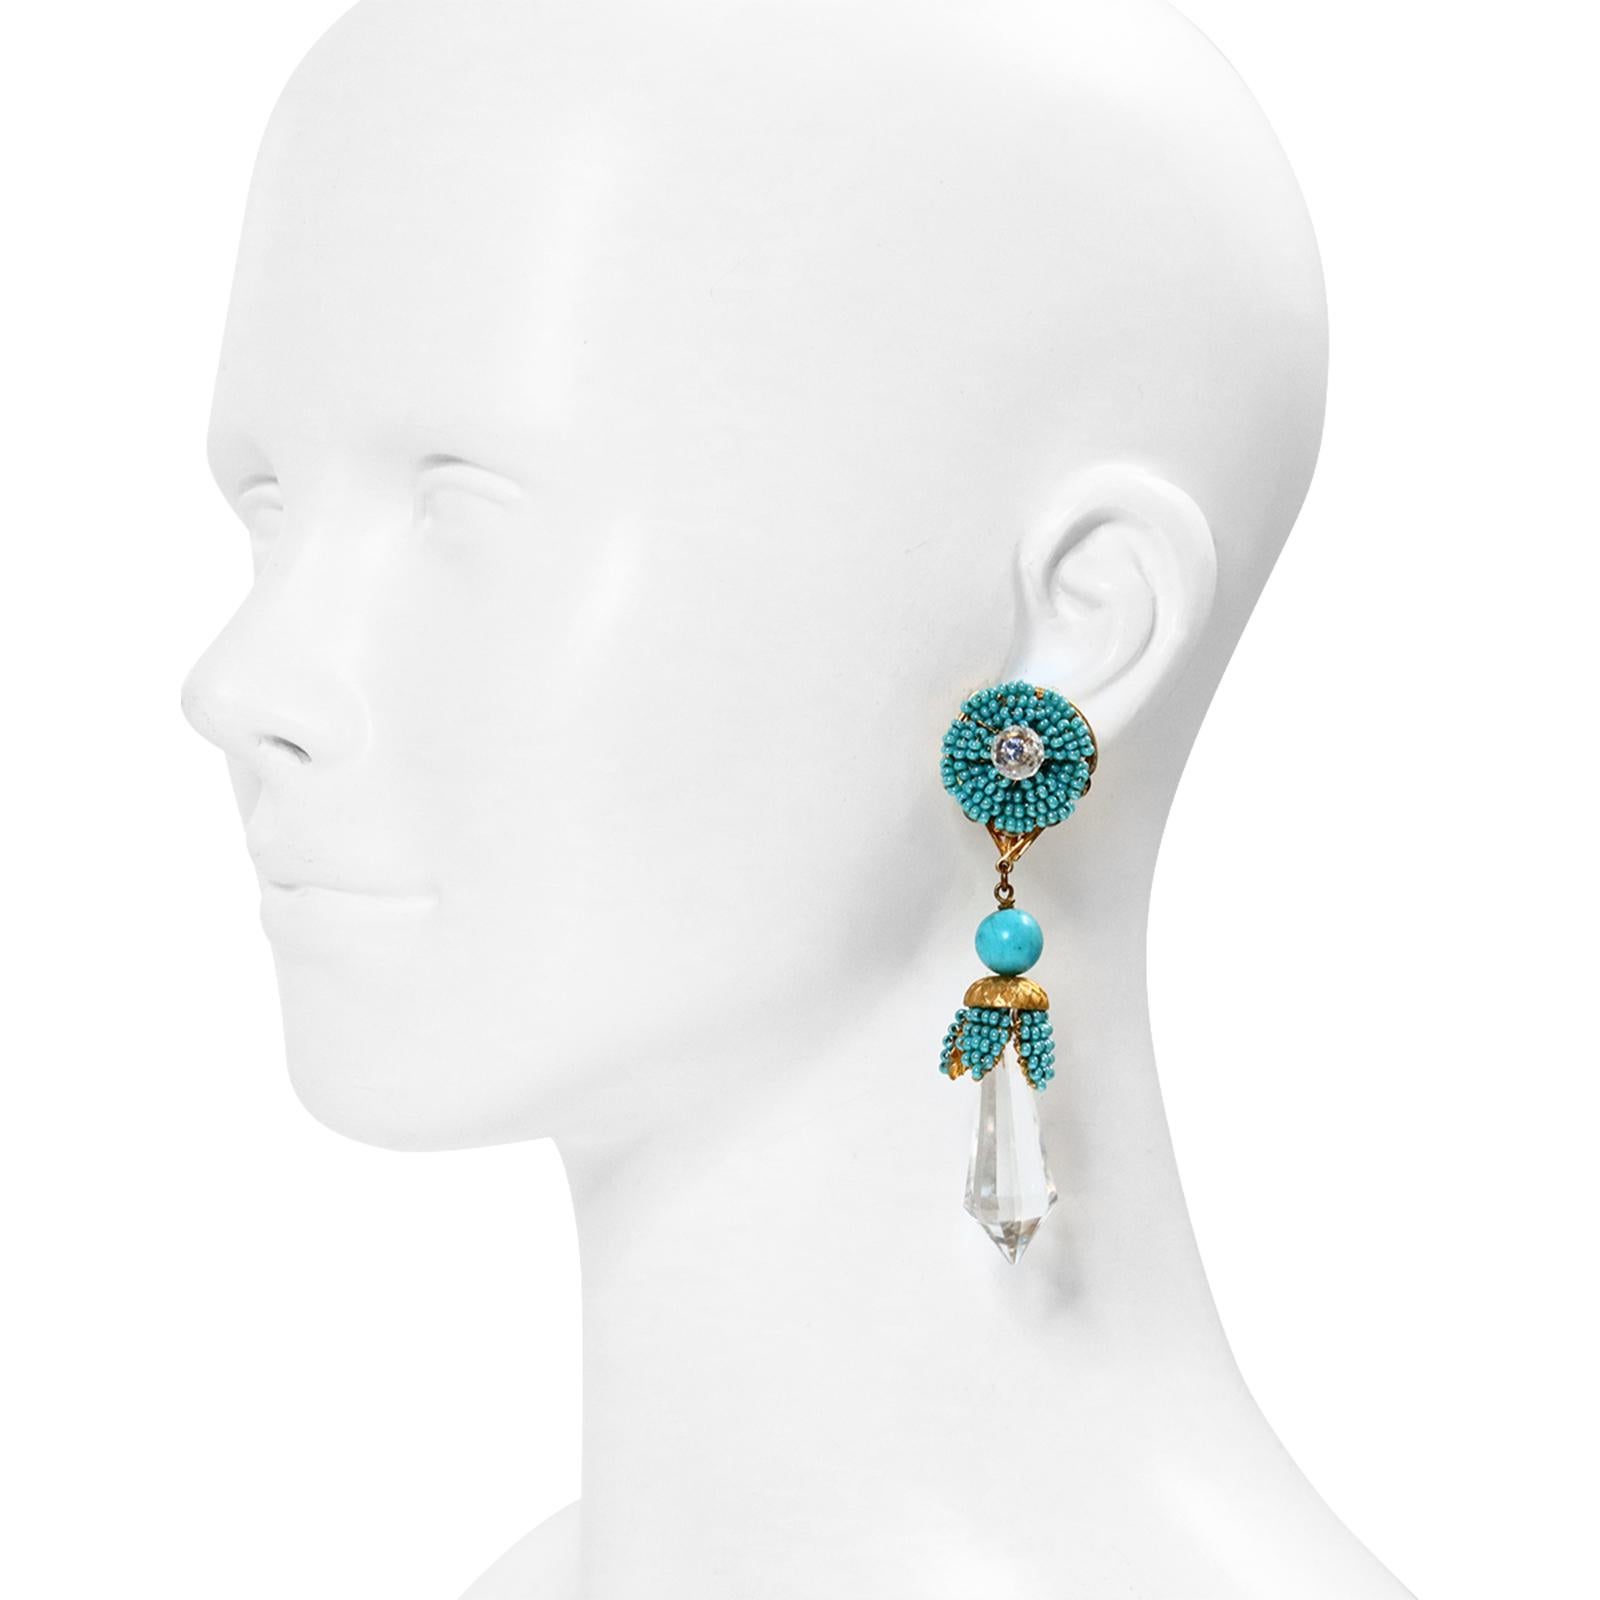 Vintage Stanley Hagler Faux Turquoise and Dangling Crystal Piece Earrings Circa 1960s. Such a wonderful piece from this era and even lovely mixed with real. This is set on Gold Tone and even the back is set on a gorgeous decorative flower base. 